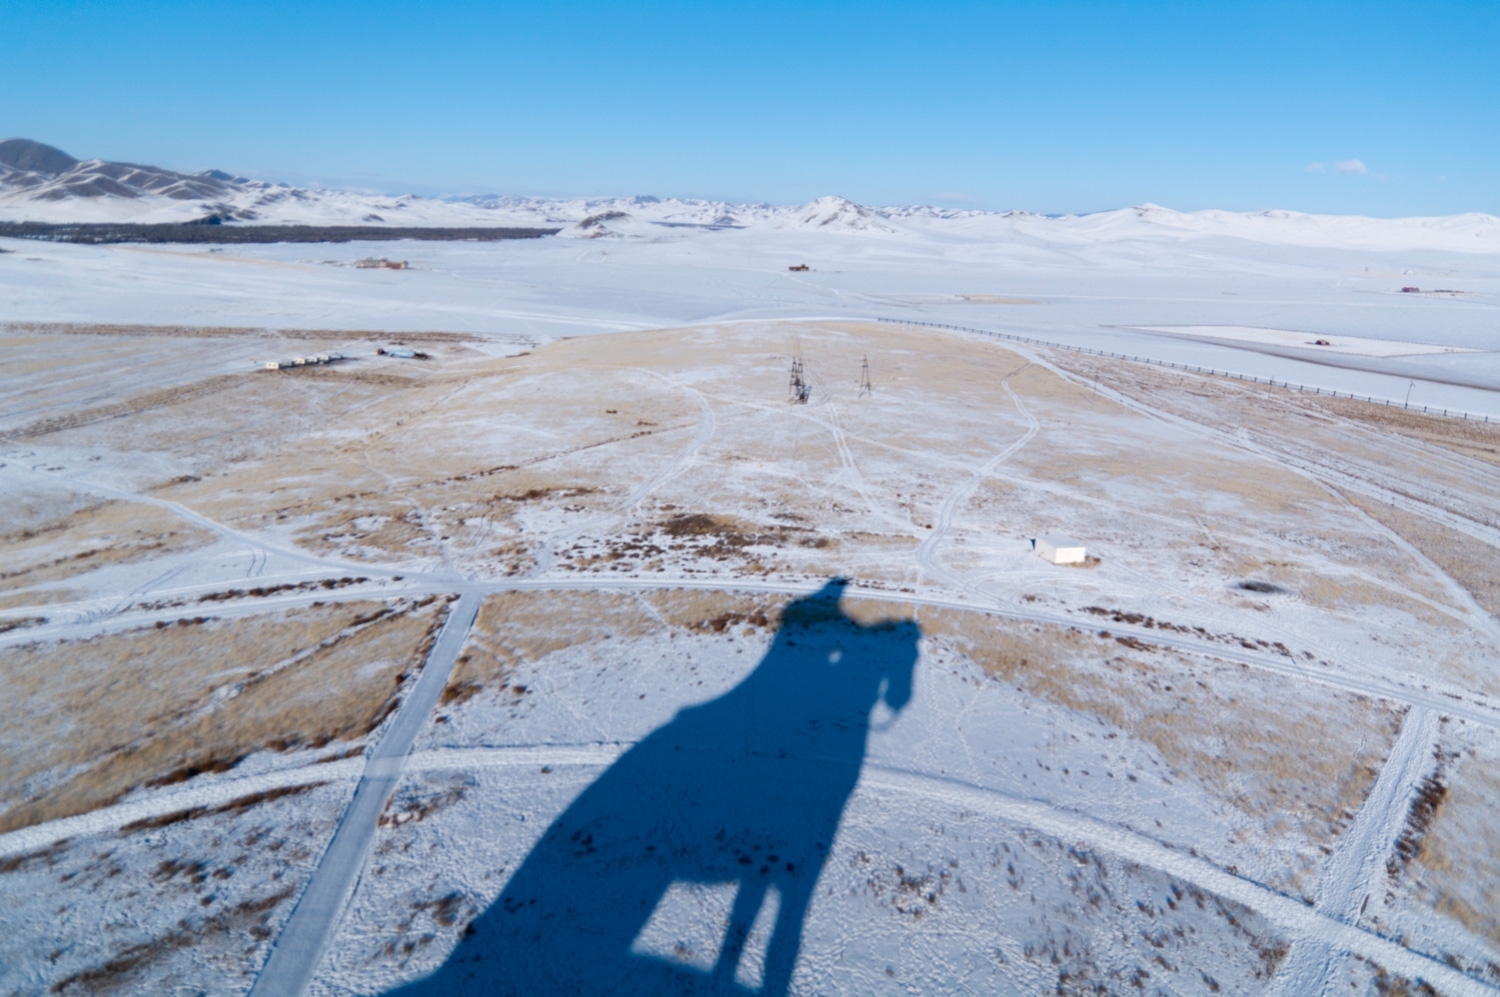 From Atop Genghis Khan Equestrian Statue